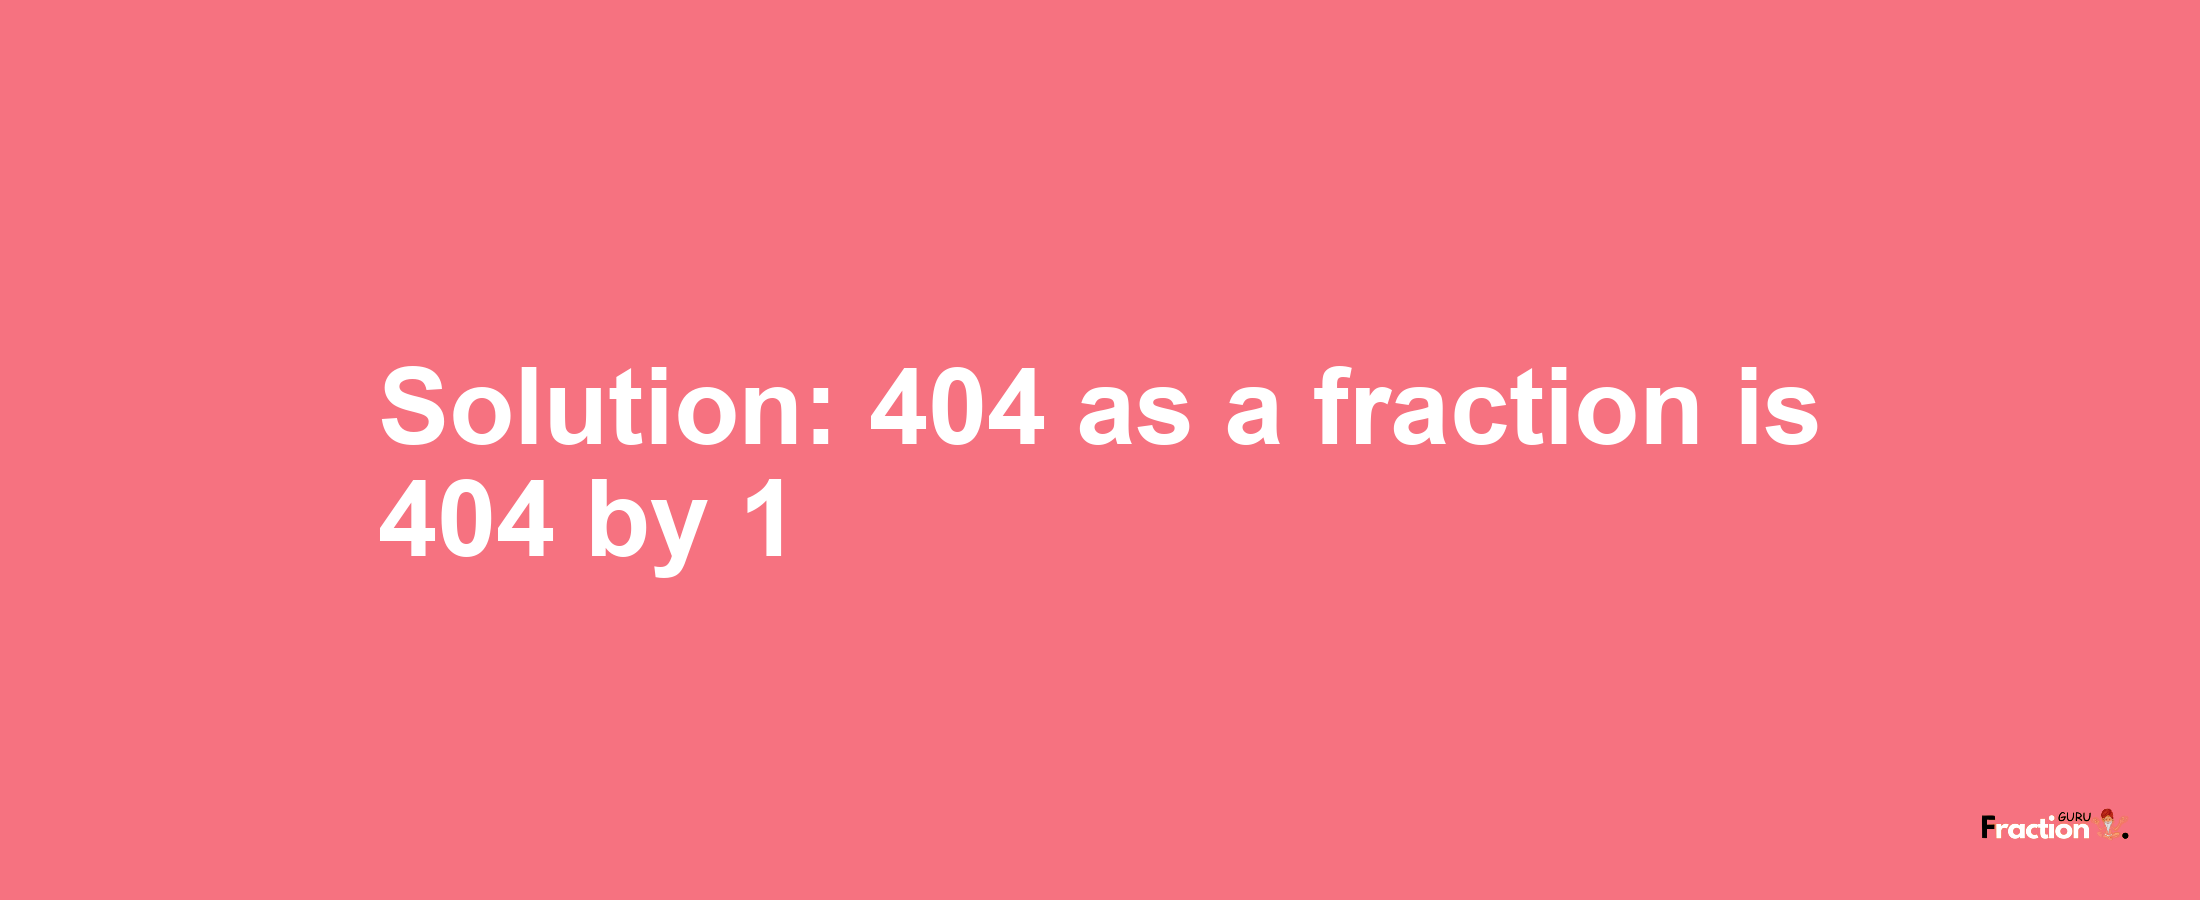 Solution:404 as a fraction is 404/1